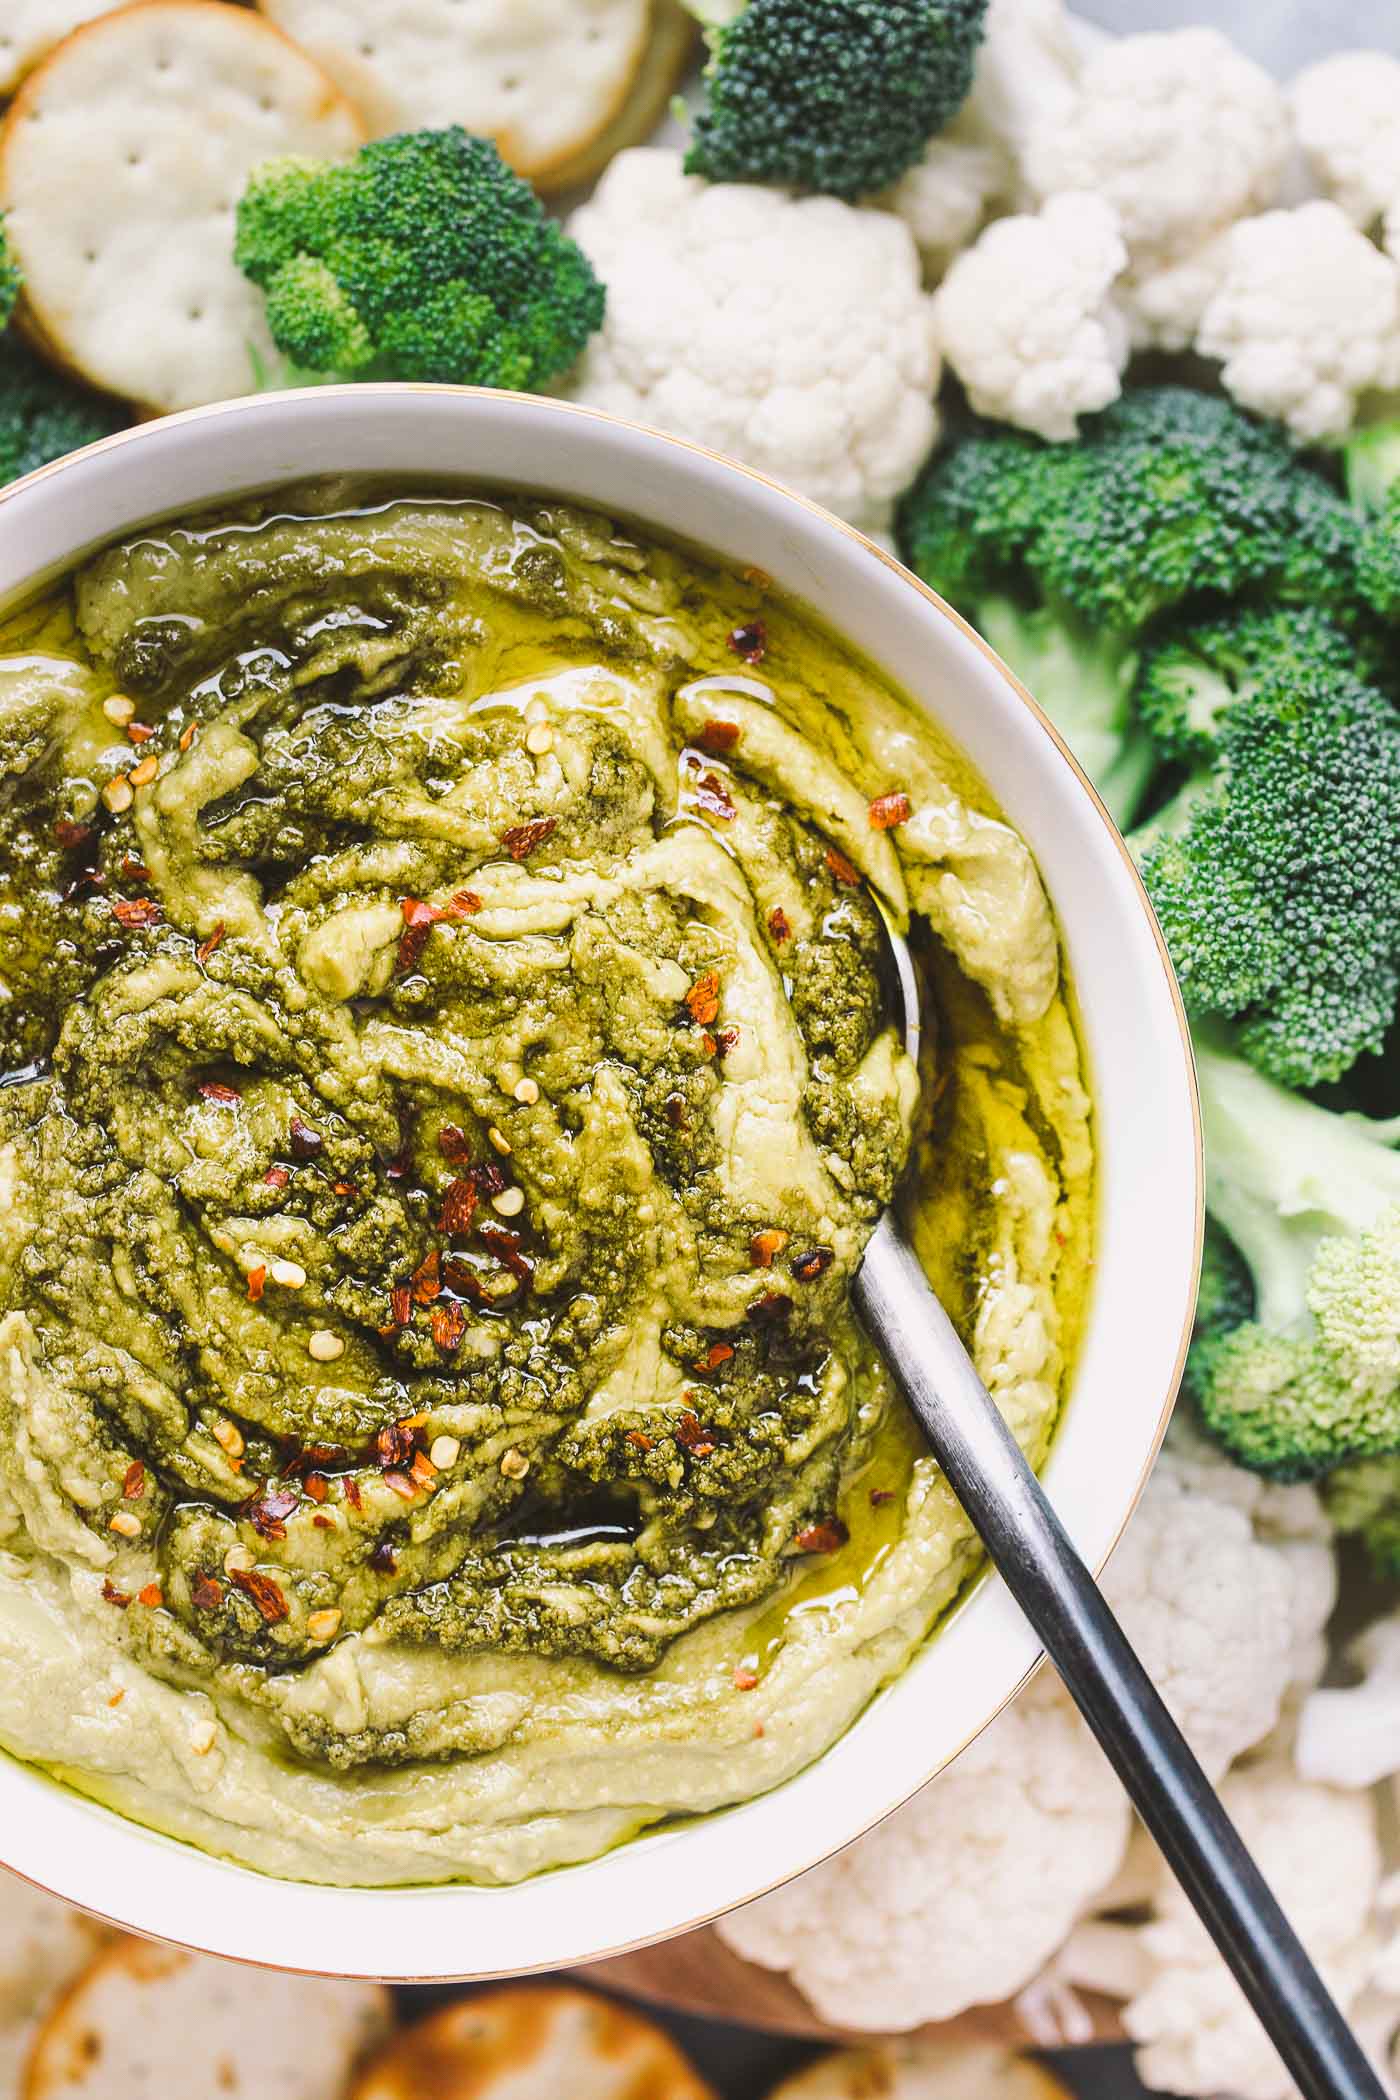 a creamy, dreamy, totally addictive white bean pesto hummus loaded with the bright flavors of pesto & lemon. perfect for healthy end-of-summer snacking!